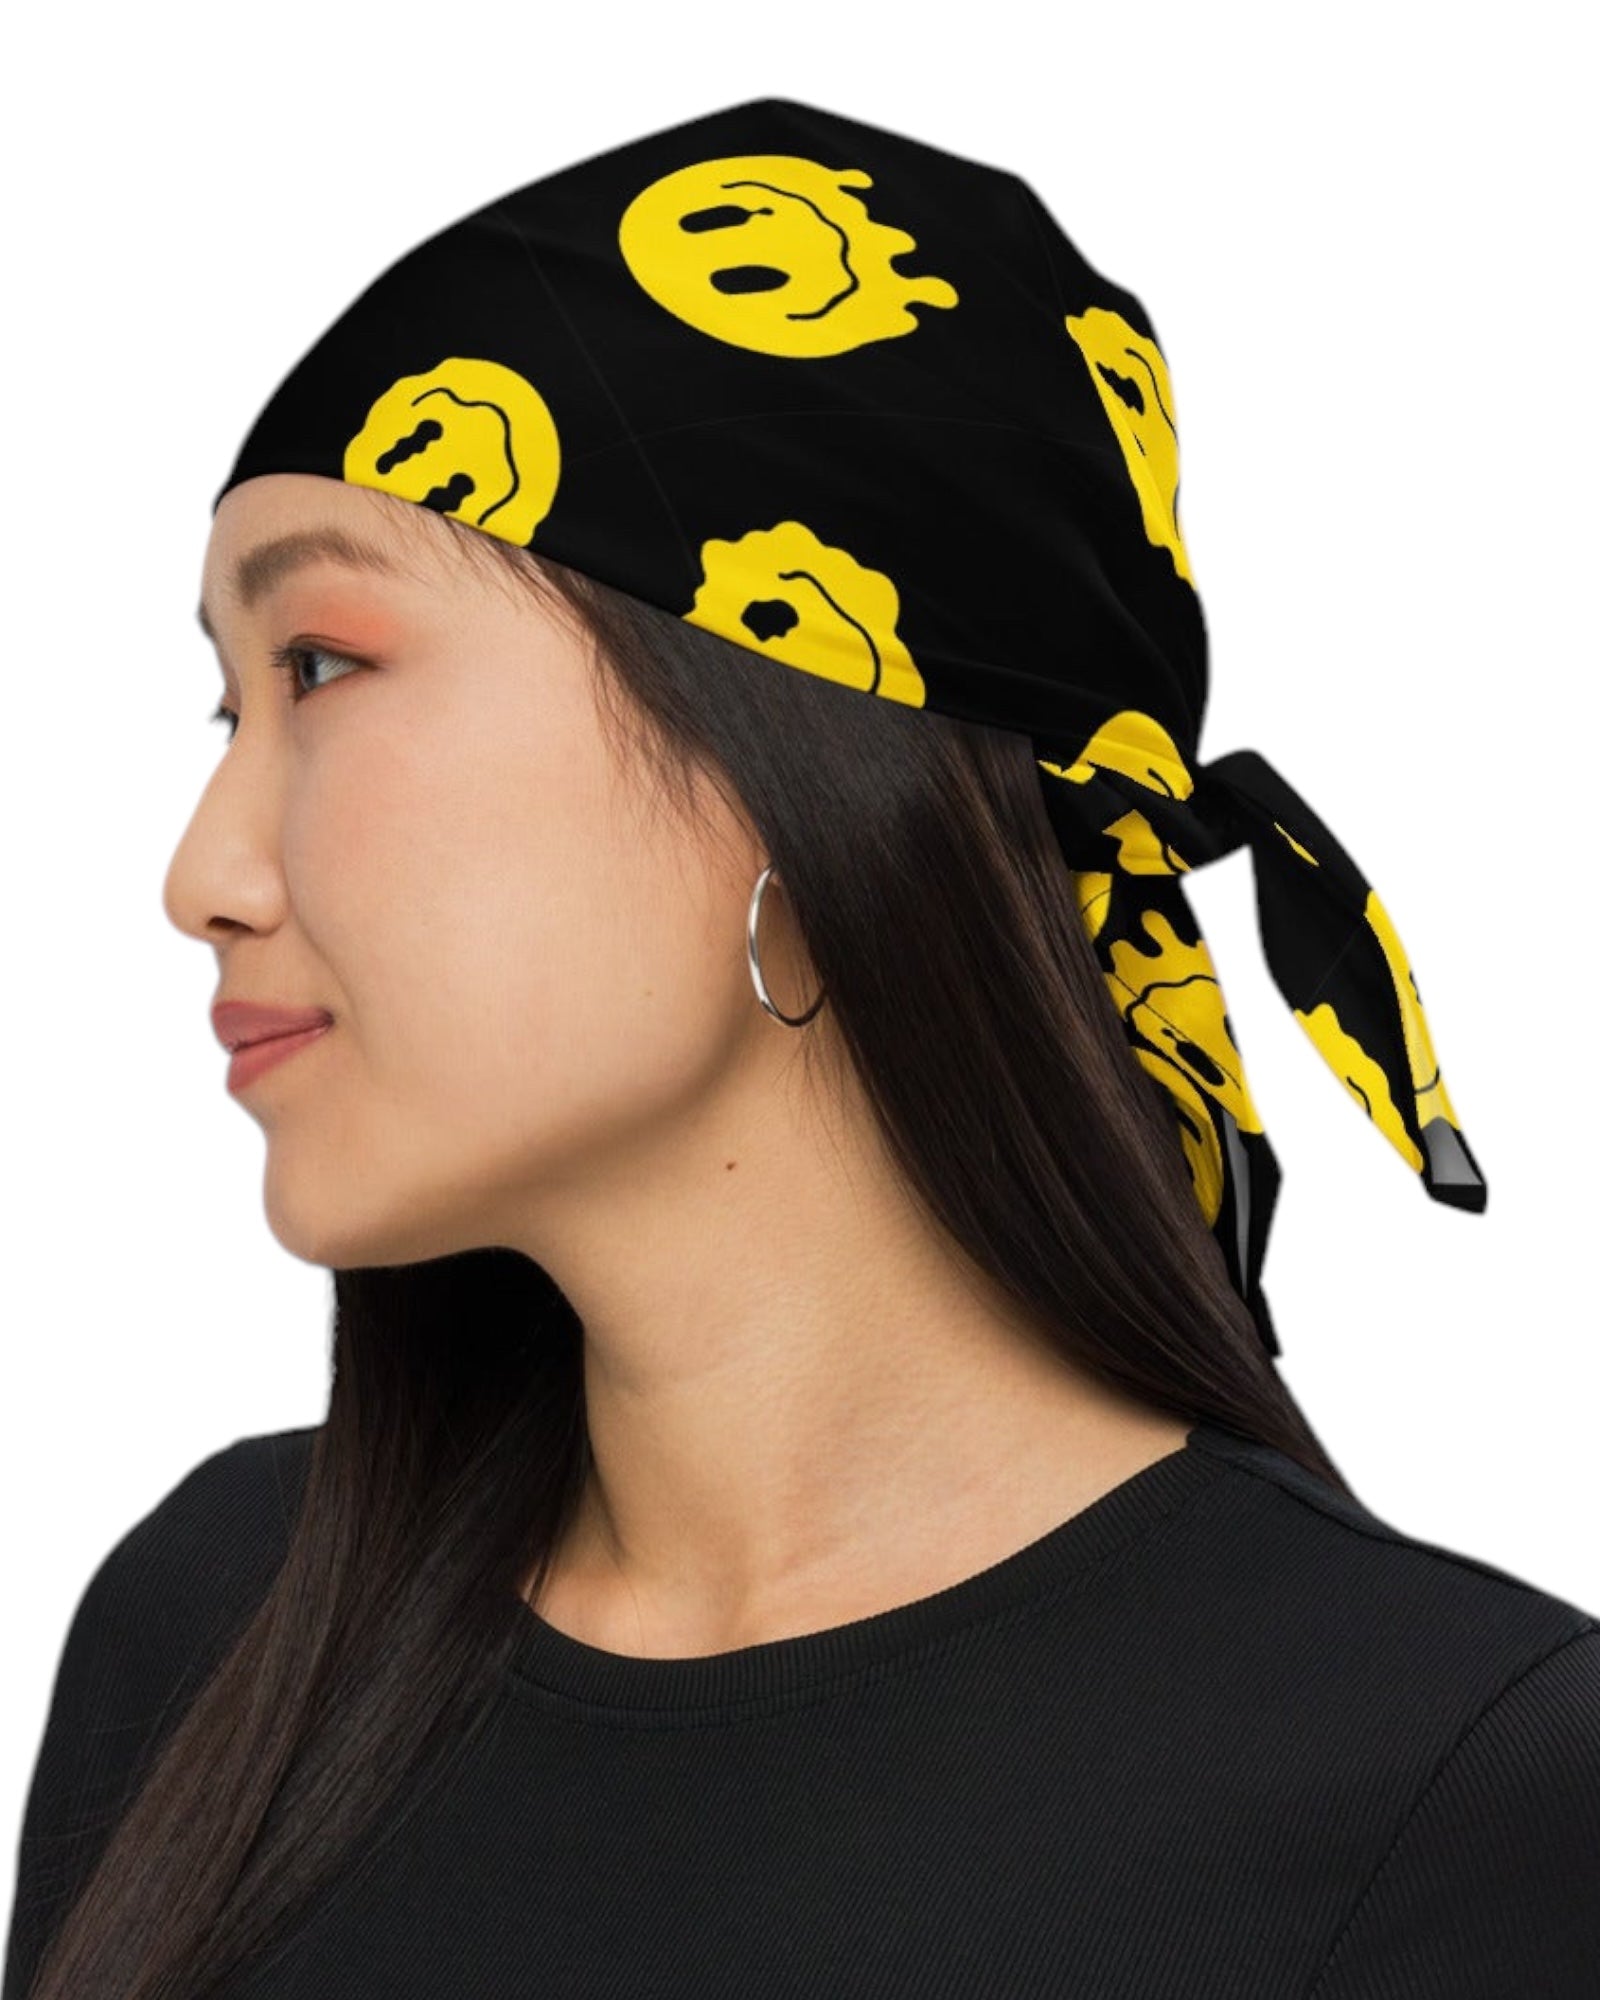 Woman wearing the Trippie Bandana on her head as a head scarf- Features a vibrant yellow smiley face pattern on a black background, adding a bold touch to her rave outfit.